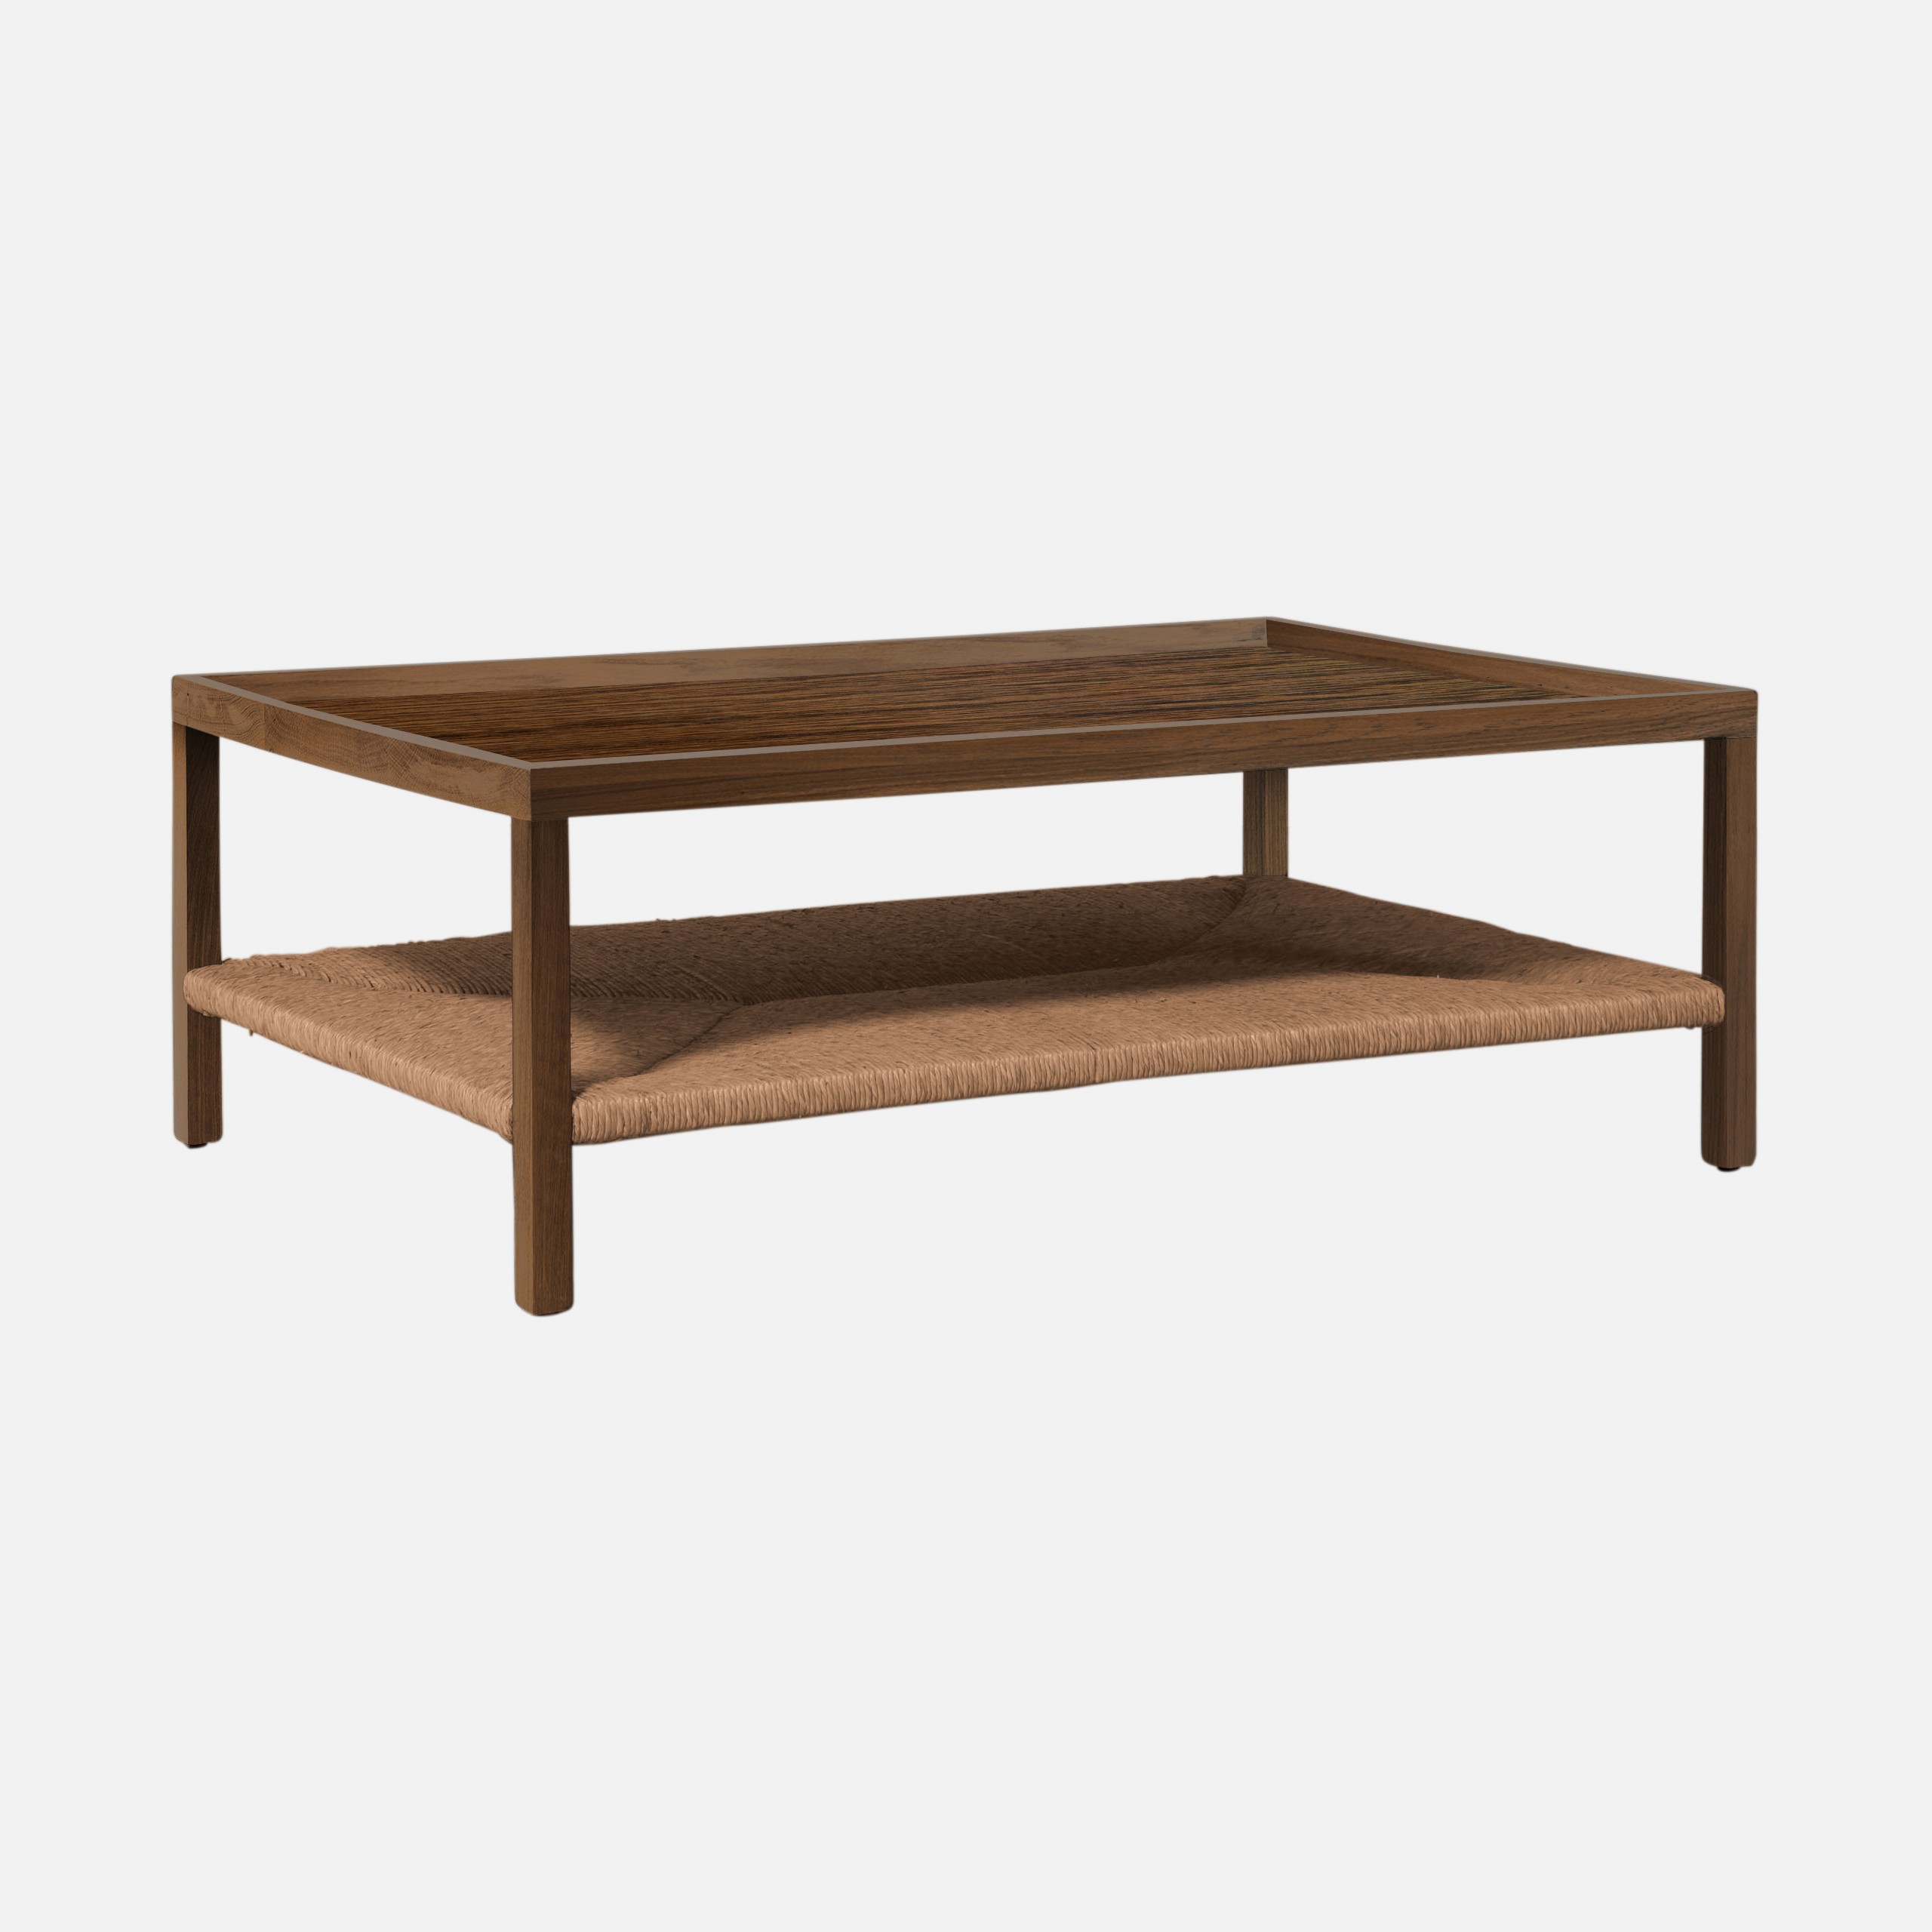 a wooden table with a shelf underneath it